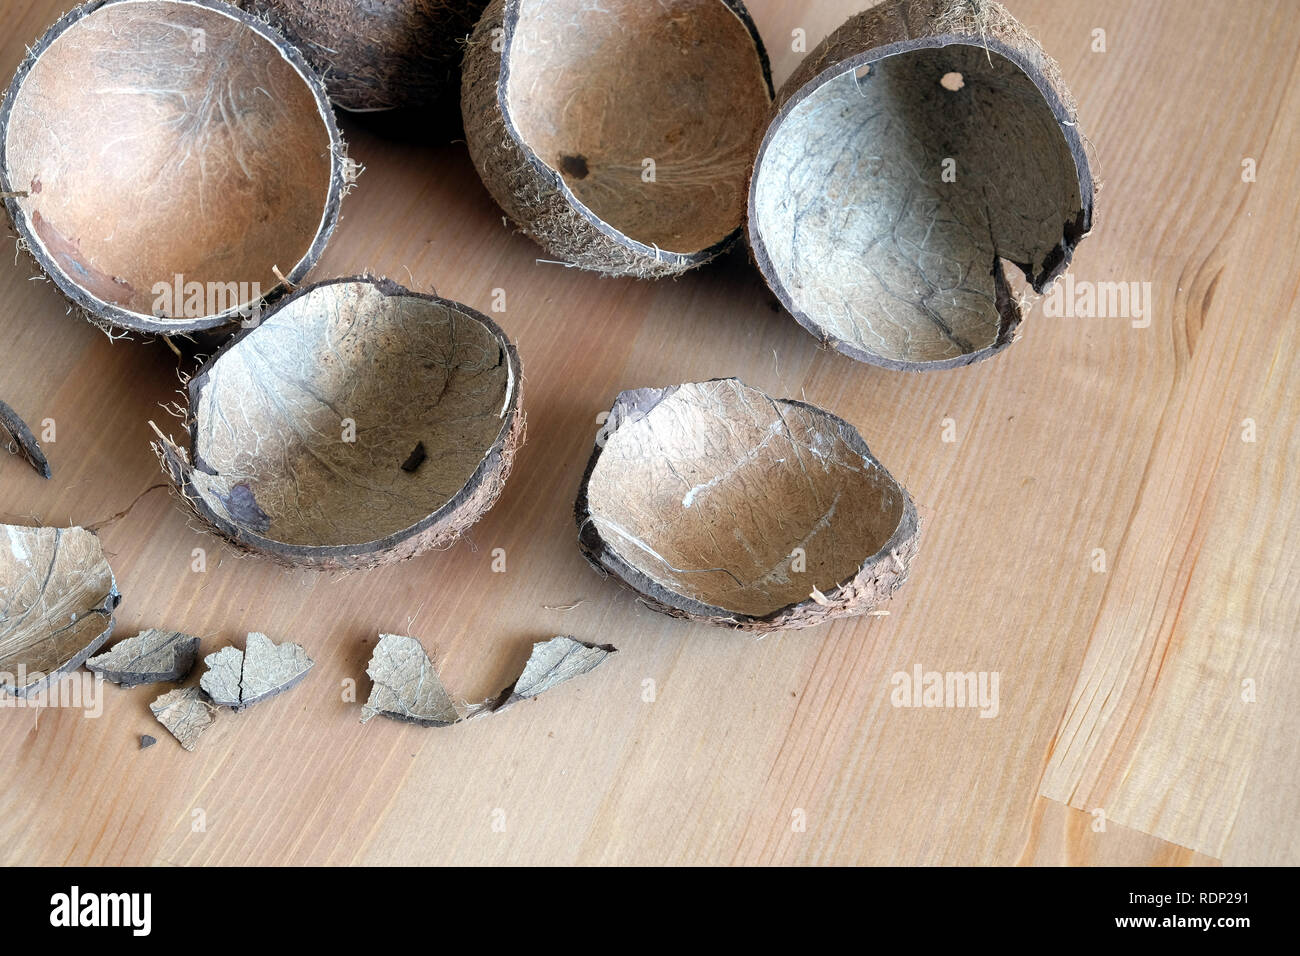 Still life with broken coconut shell ripe white flesh inside and debris on brown wooden table as background. Horizontal close up photo Stock Photo